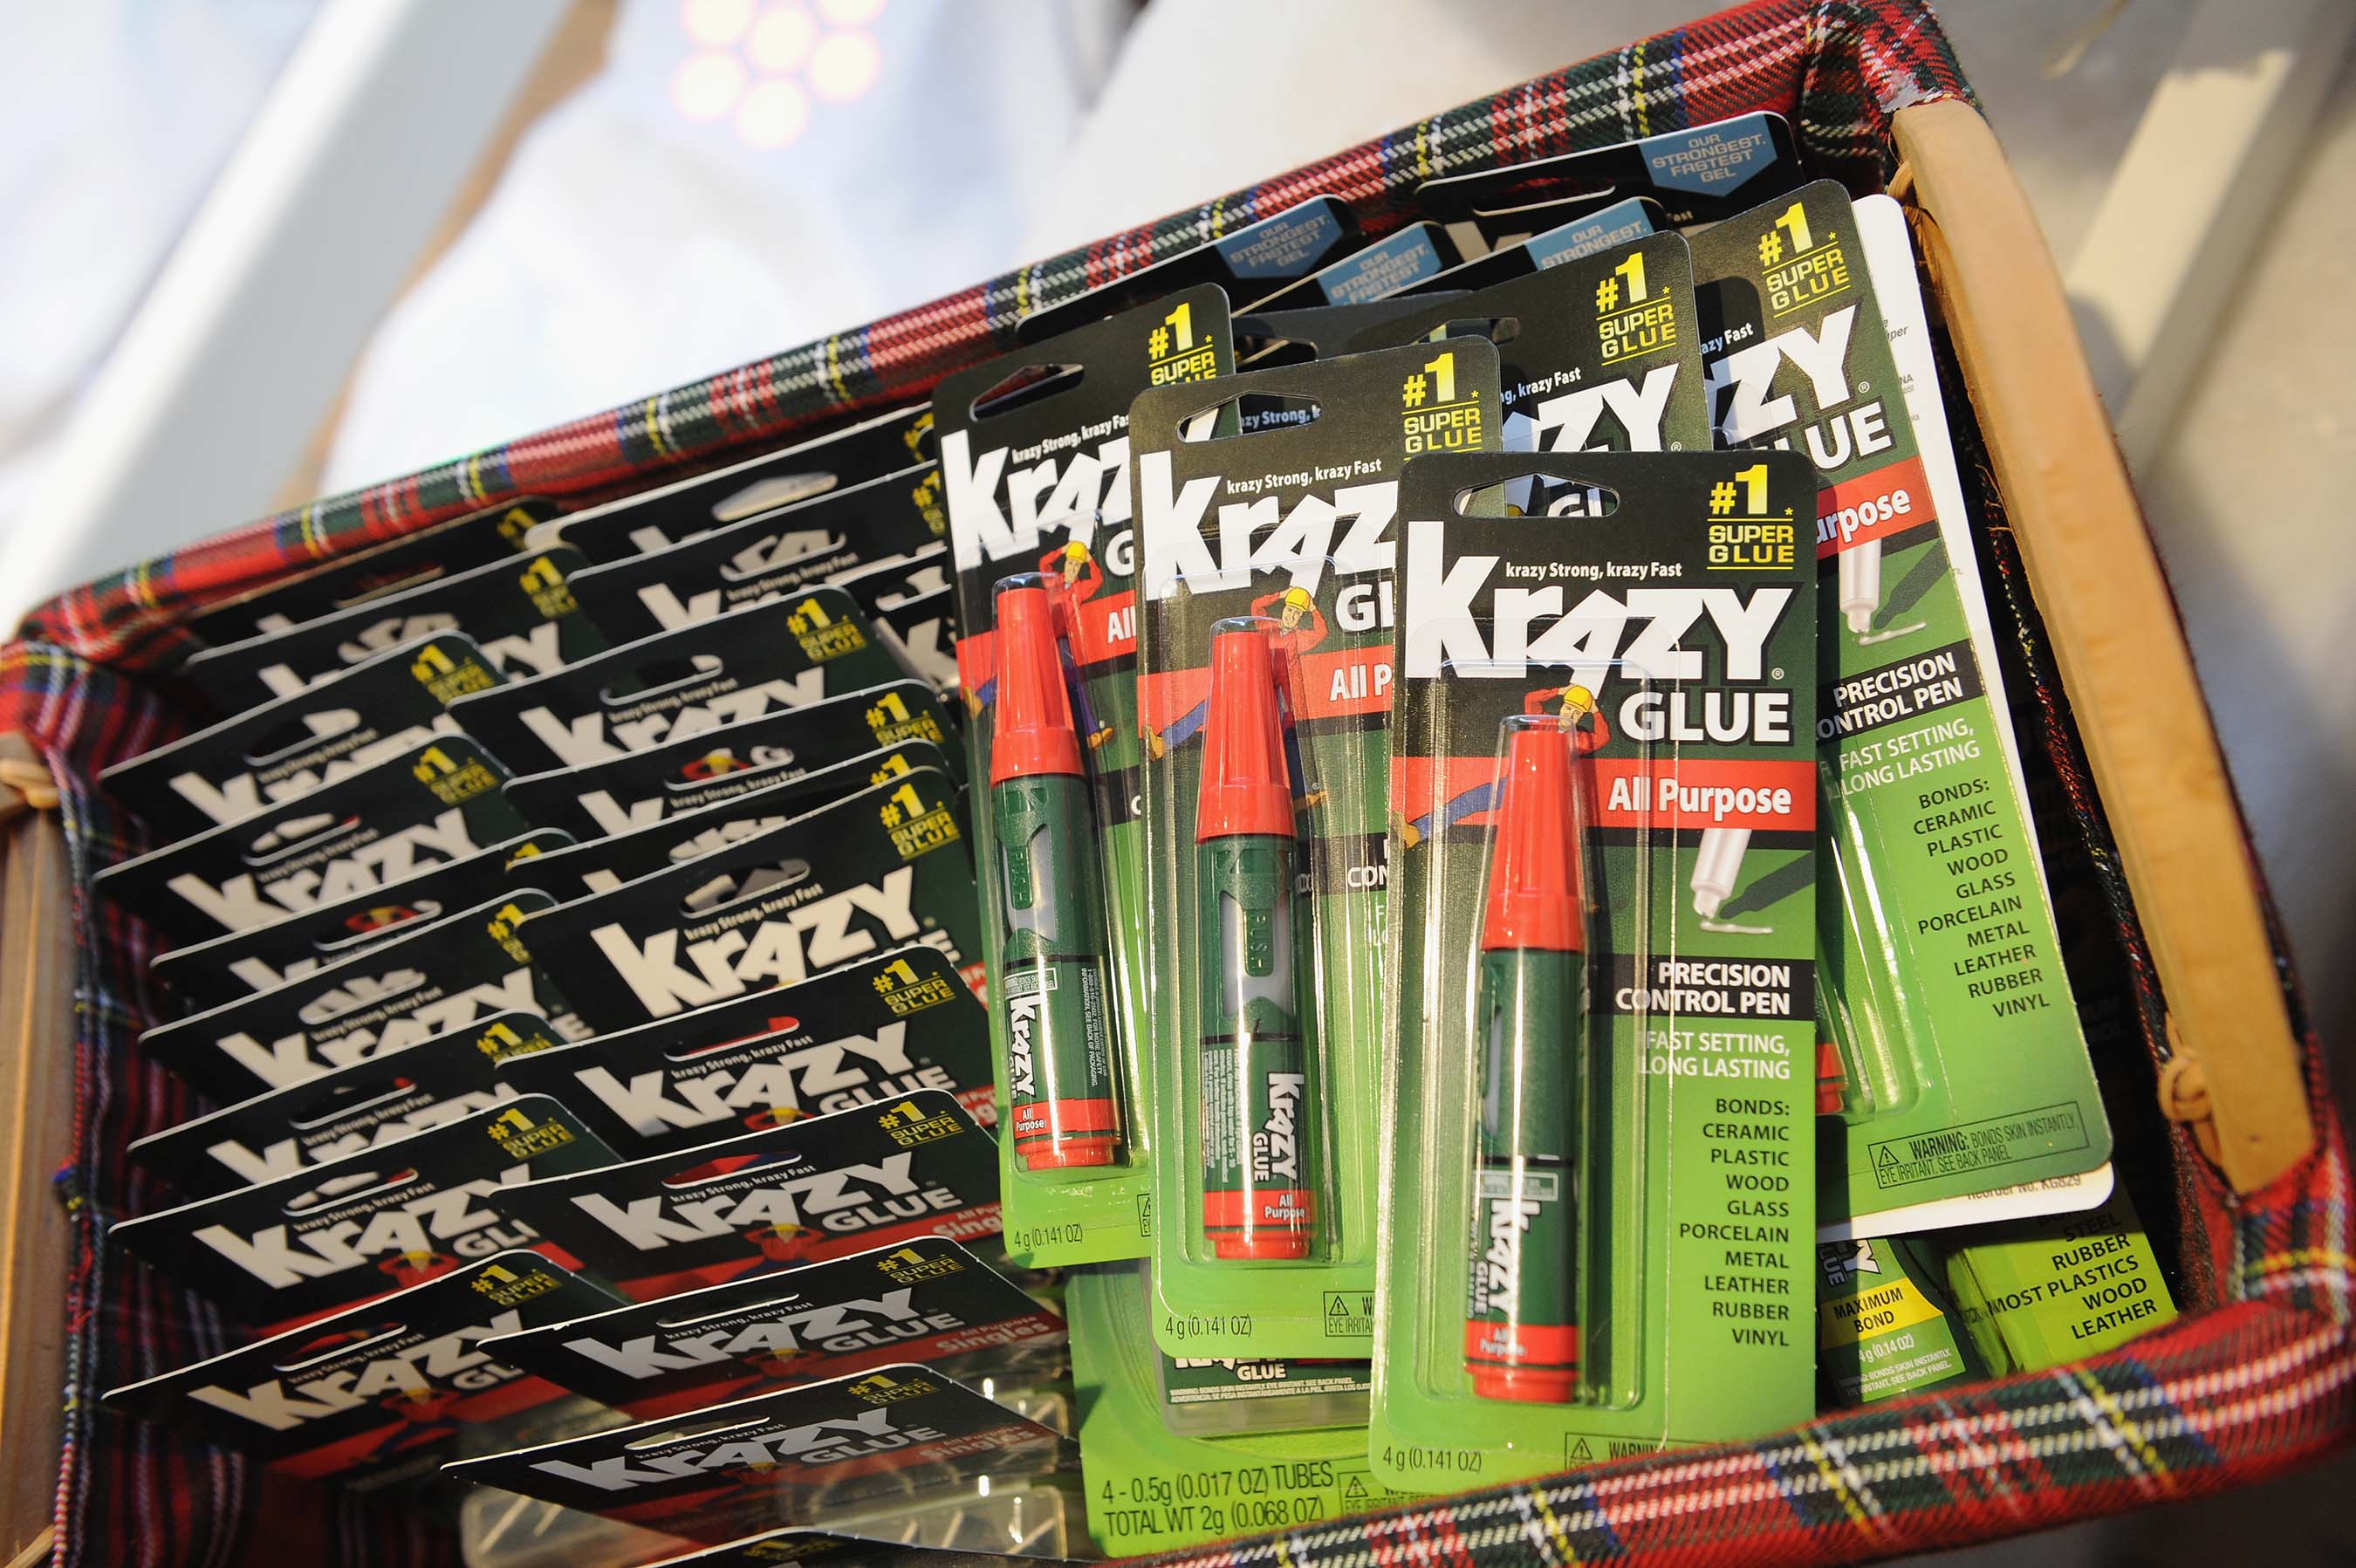 Krazy Glue® provides you with the fastest bonds needed to instantly make, create and do crazy things. The product’s superior speed and strength make it a must-have for DIYers and crafters embarking on household repairs or home improvement projects.